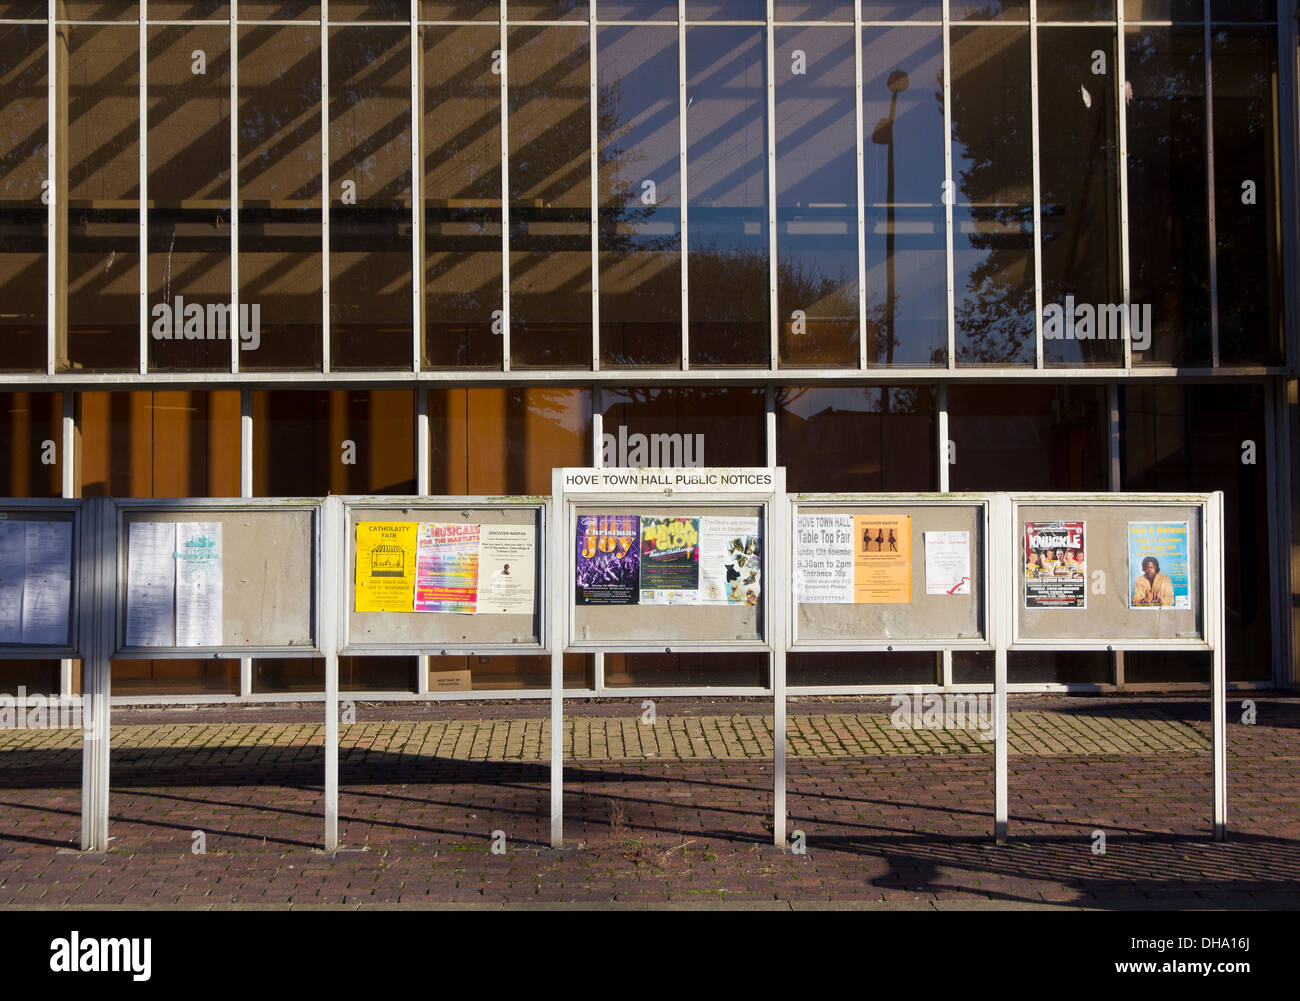 Hove, East Sussex, UK - 4 Nov 2013: The exterior of Hove Town Hall Stock Photo